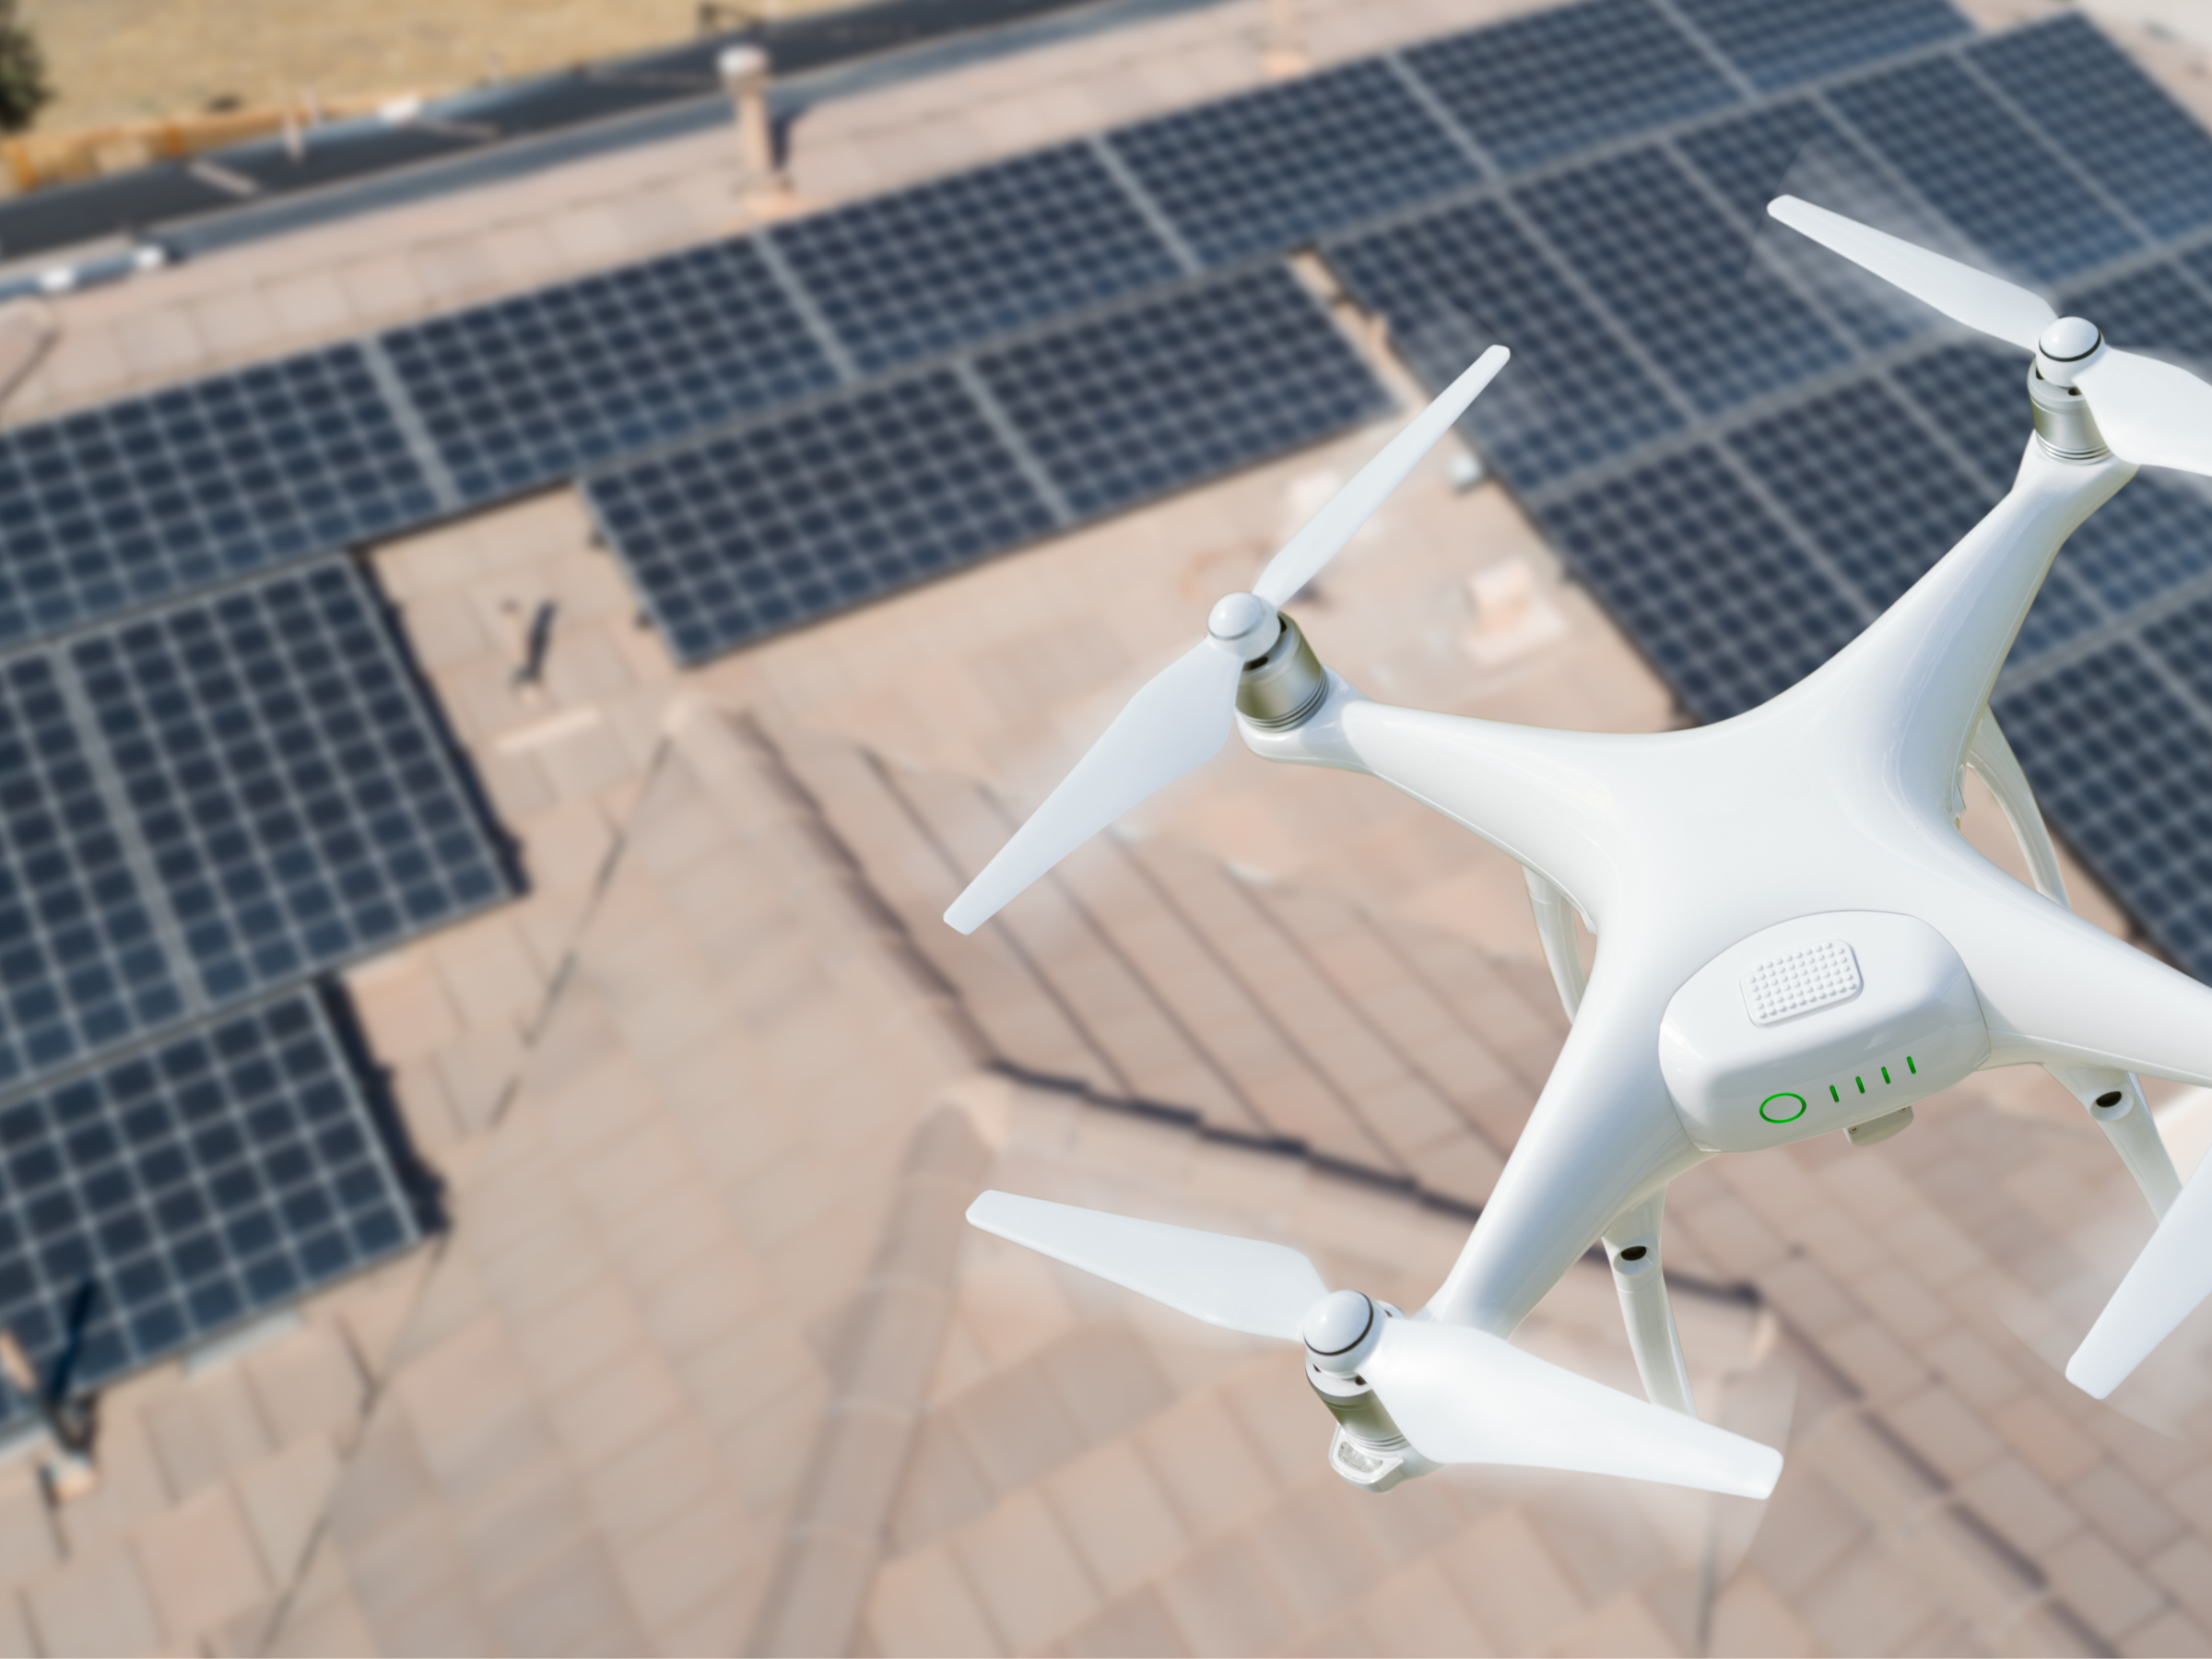 Webinar: Future of Drones in Facility Management